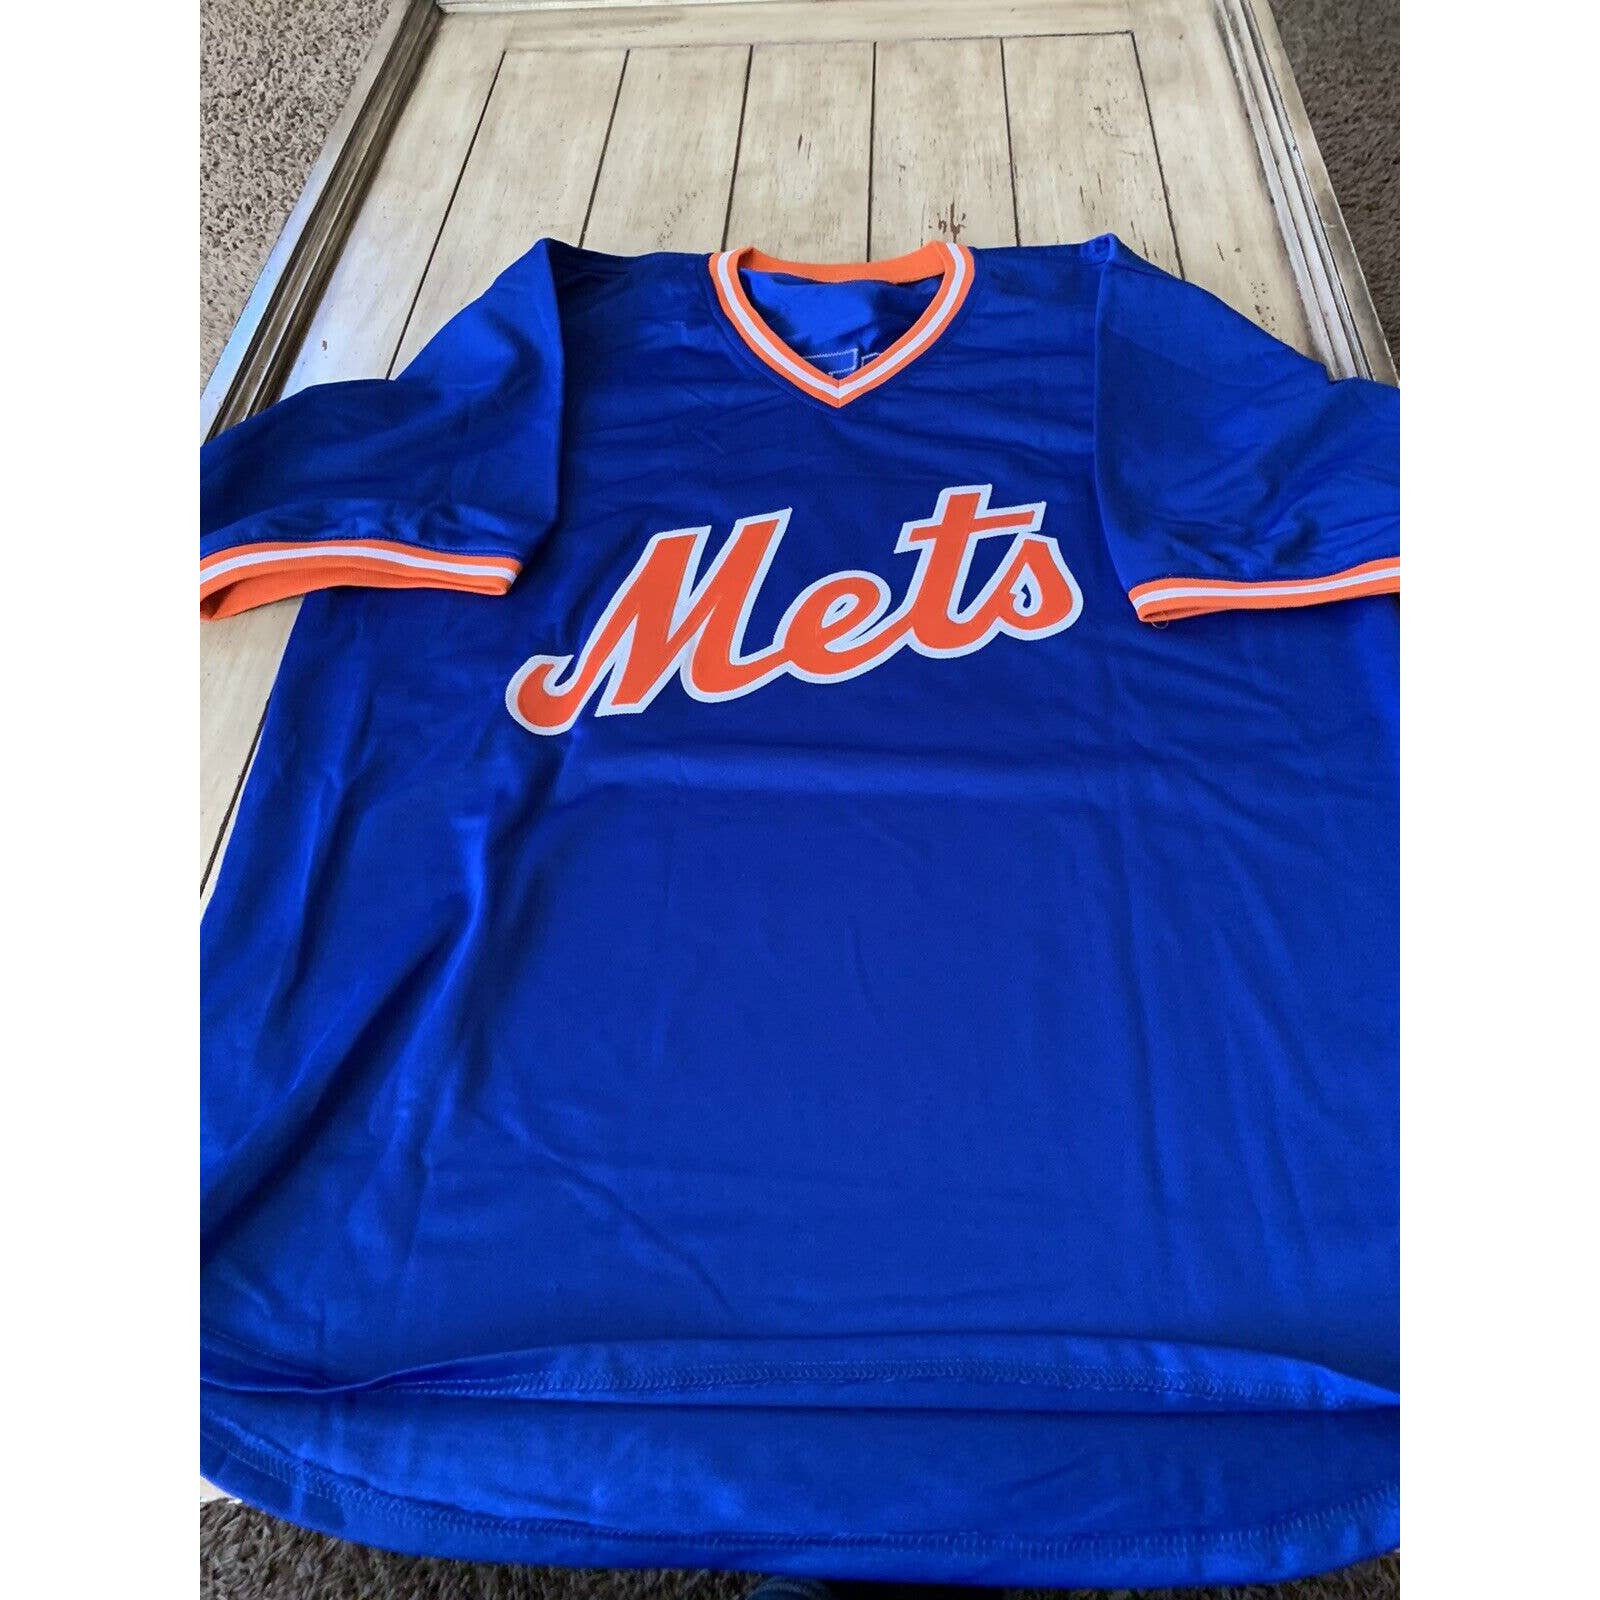 Doc Gooden Autographed/Signed Jersey COA New York Mets NY Doctor K - TreasuresEvolved